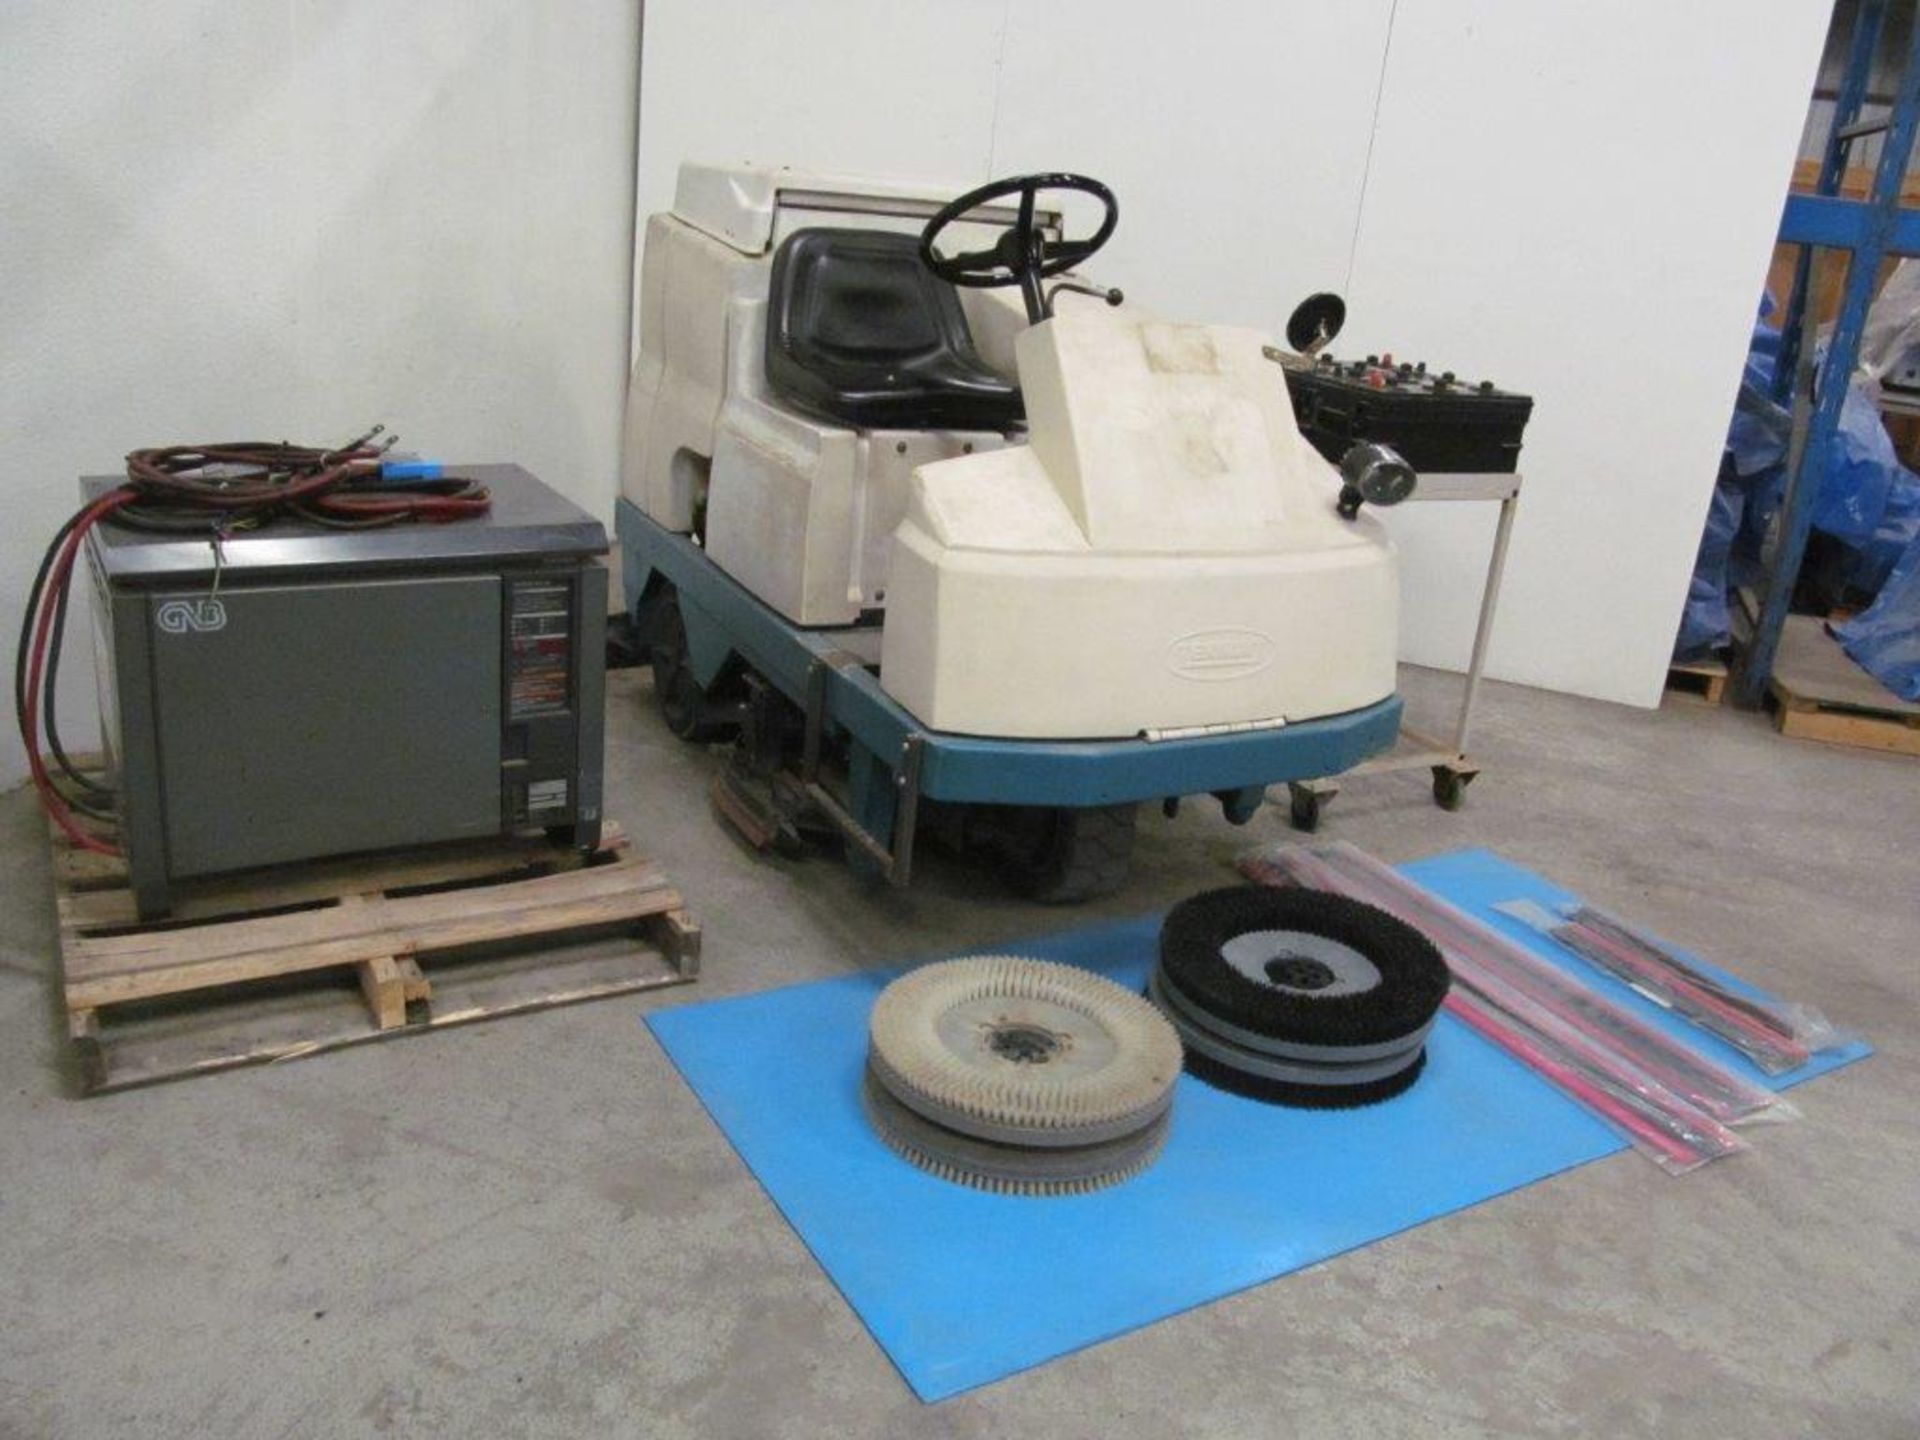 TENNANT ELECTRIC FLOOR SWEEPER, C/W CHARGER 36V, SPARE BATTERIES & BRUSHES (CONDITION UNKNOWN)